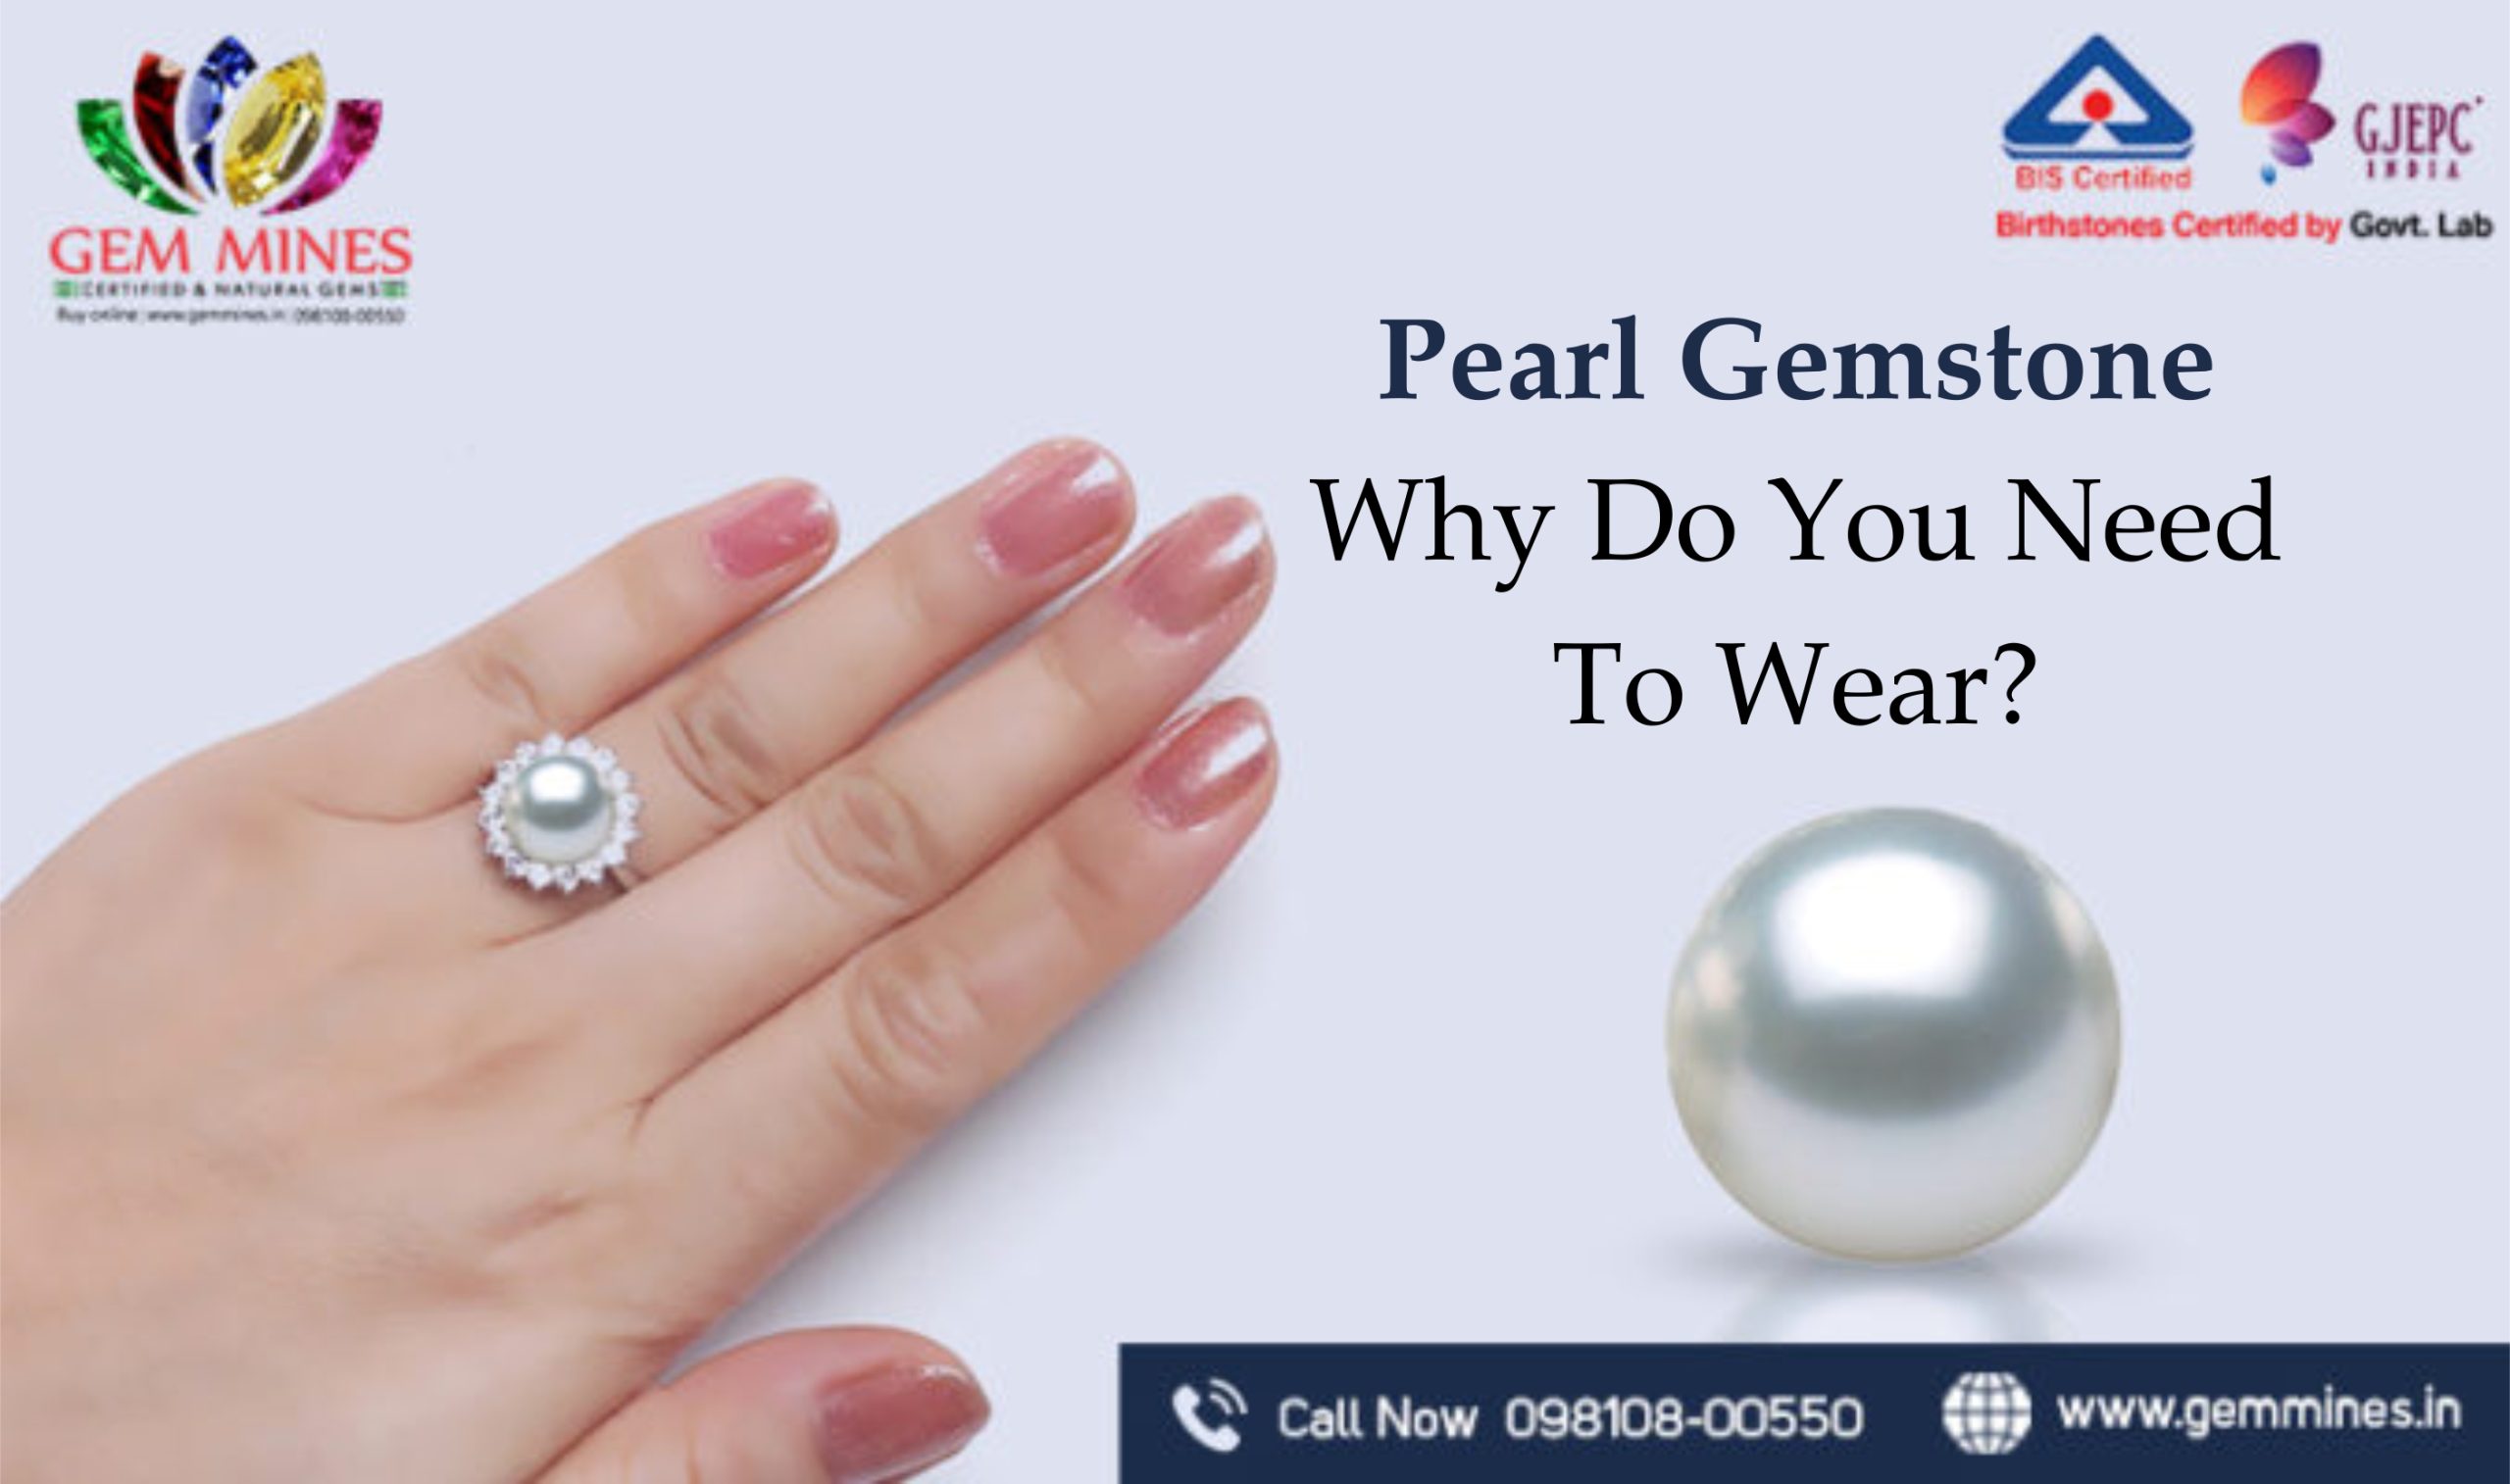 Pearl Gemstone Why Do You Need To Wear scaled 1